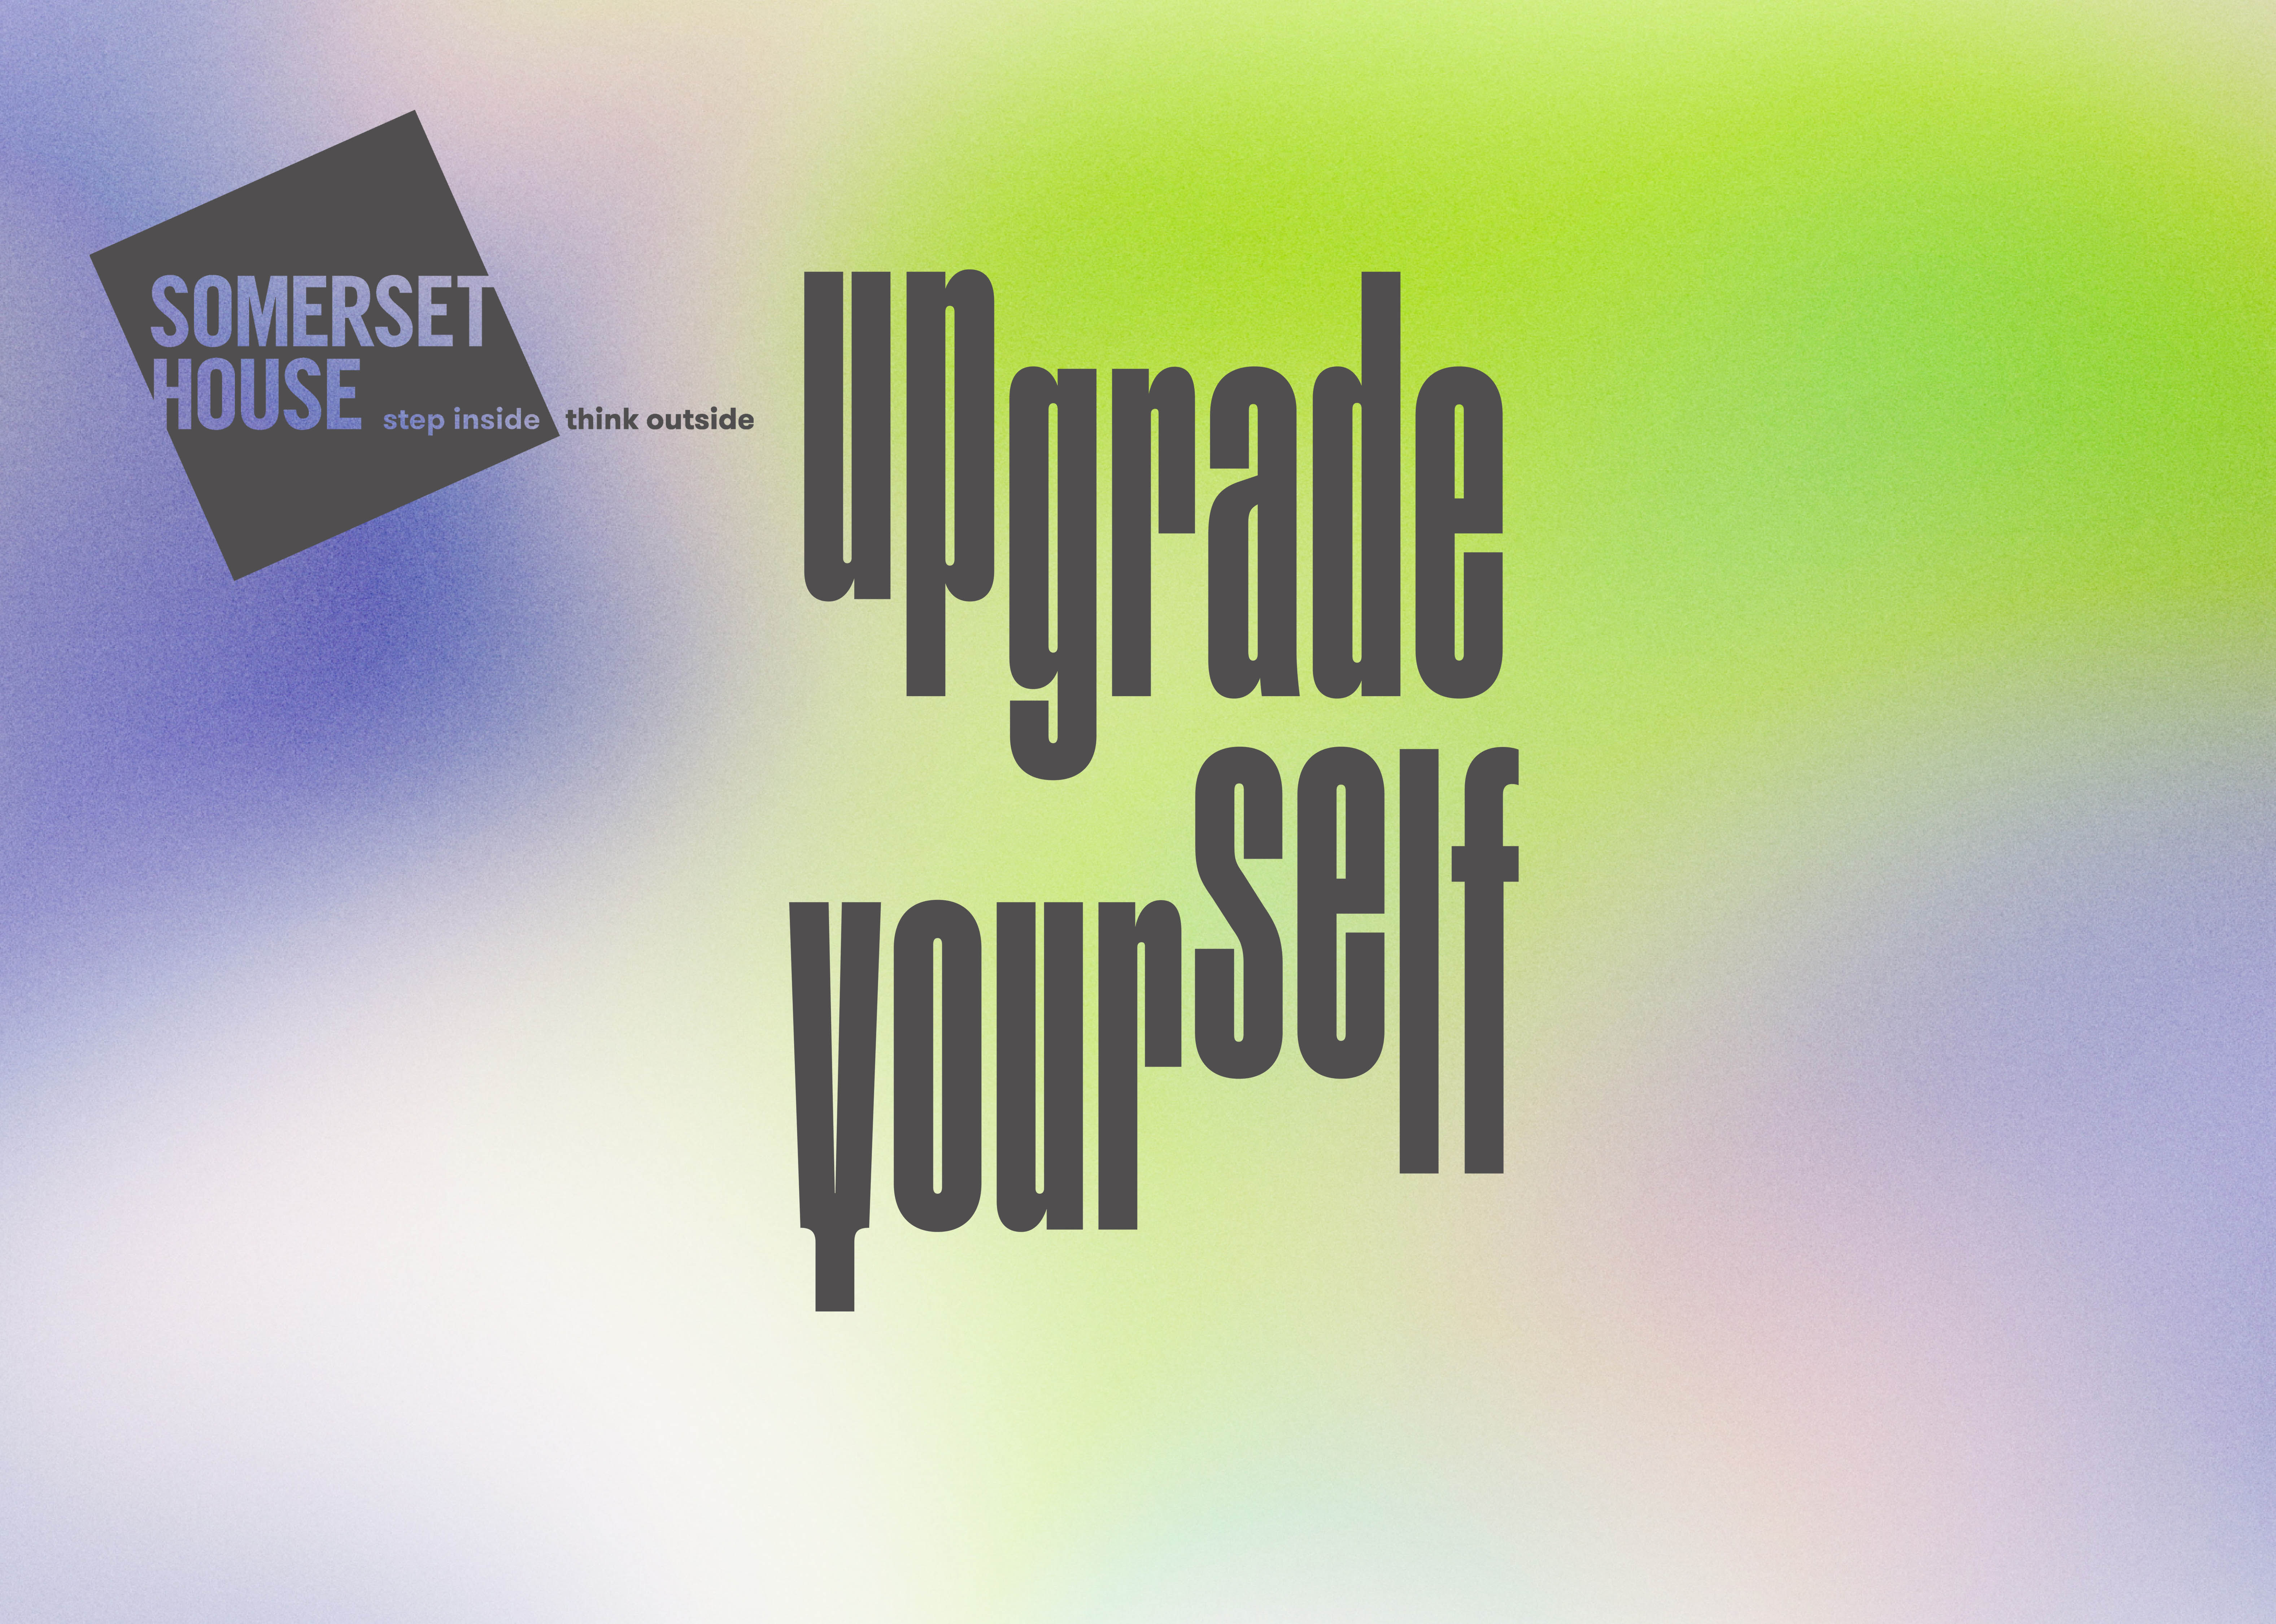 Upgrade Yourself newsletter header image. In the top left corner is the Somerset House logo against a colourful backdrop of pastel greens, blues and pinks fading into one another. Overlaid is the text UPGRADE YOURSELF.